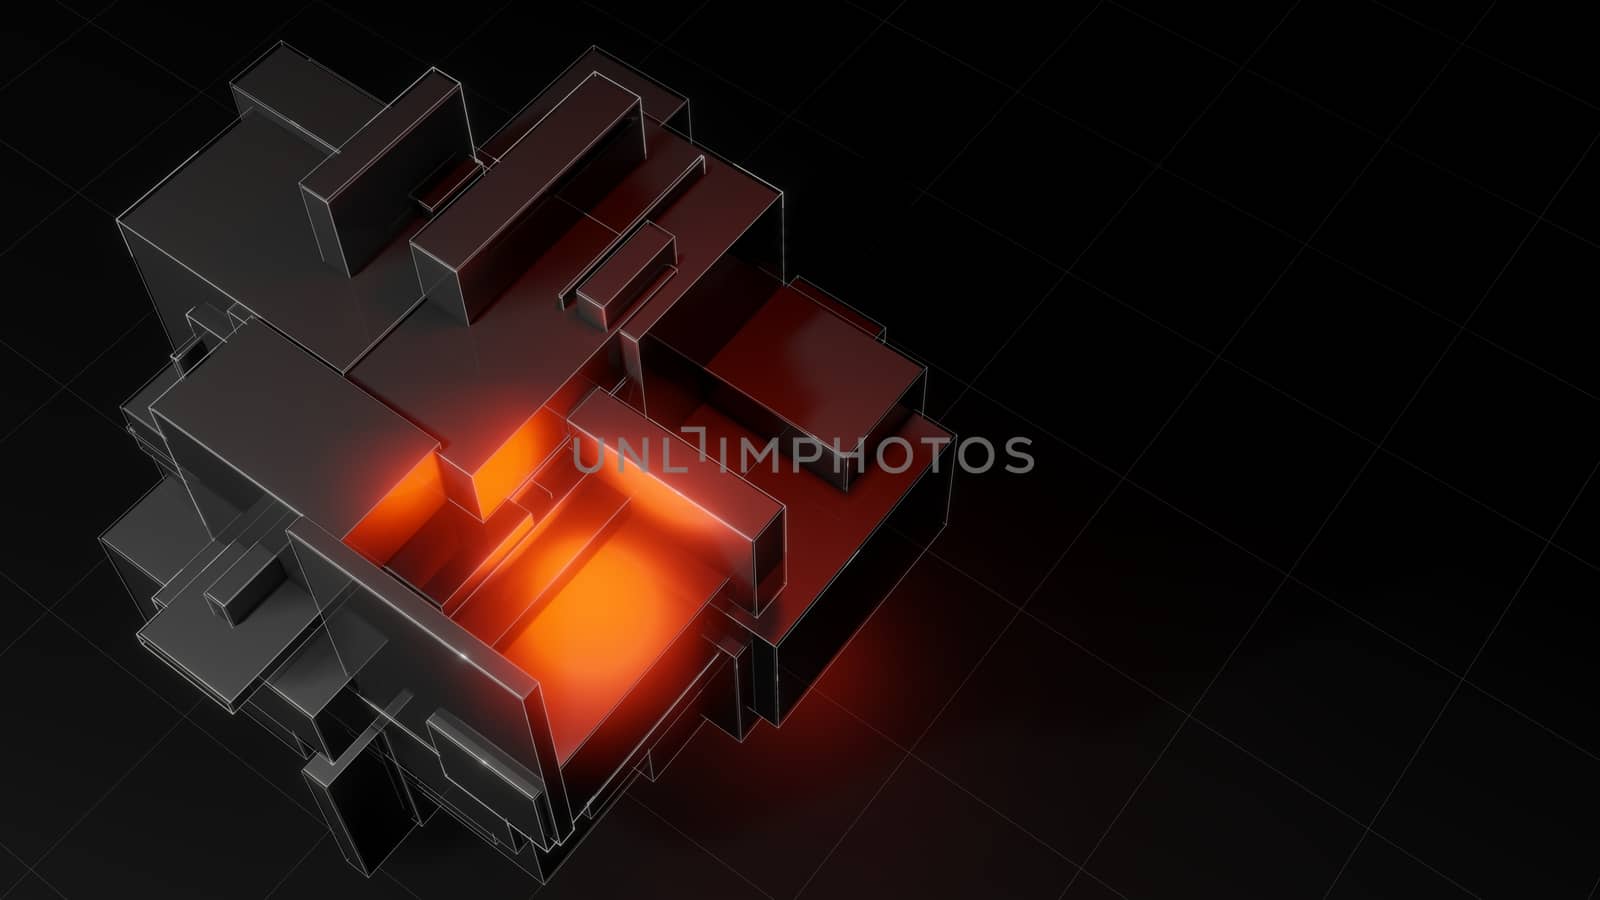 Abstract 3d object consisting of cubes. Red glow inside the object by cherezoff